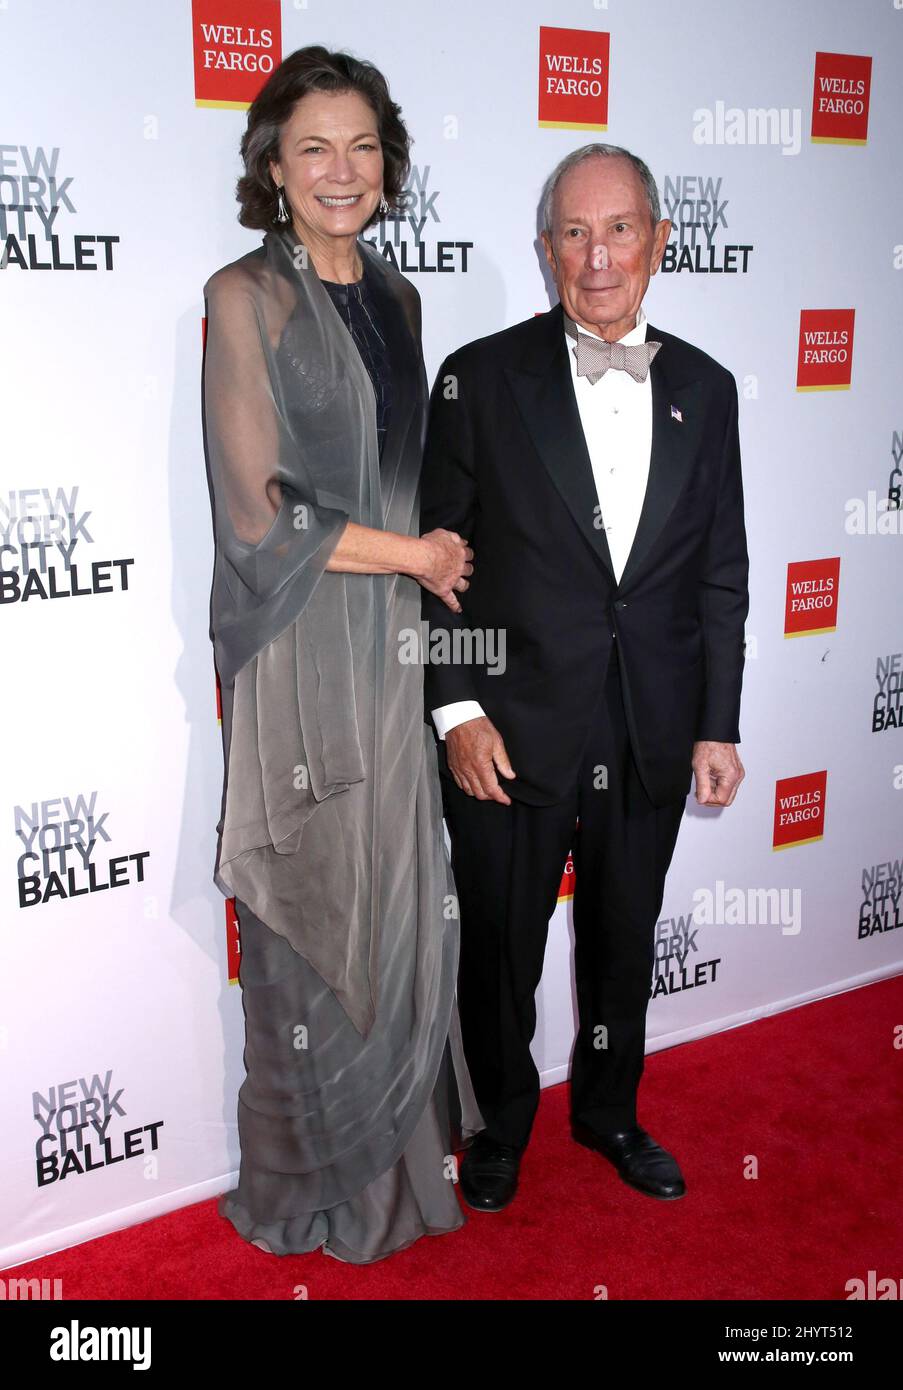 Diana Taylor and Michael Bloomberg attending the New York City Ballet ...